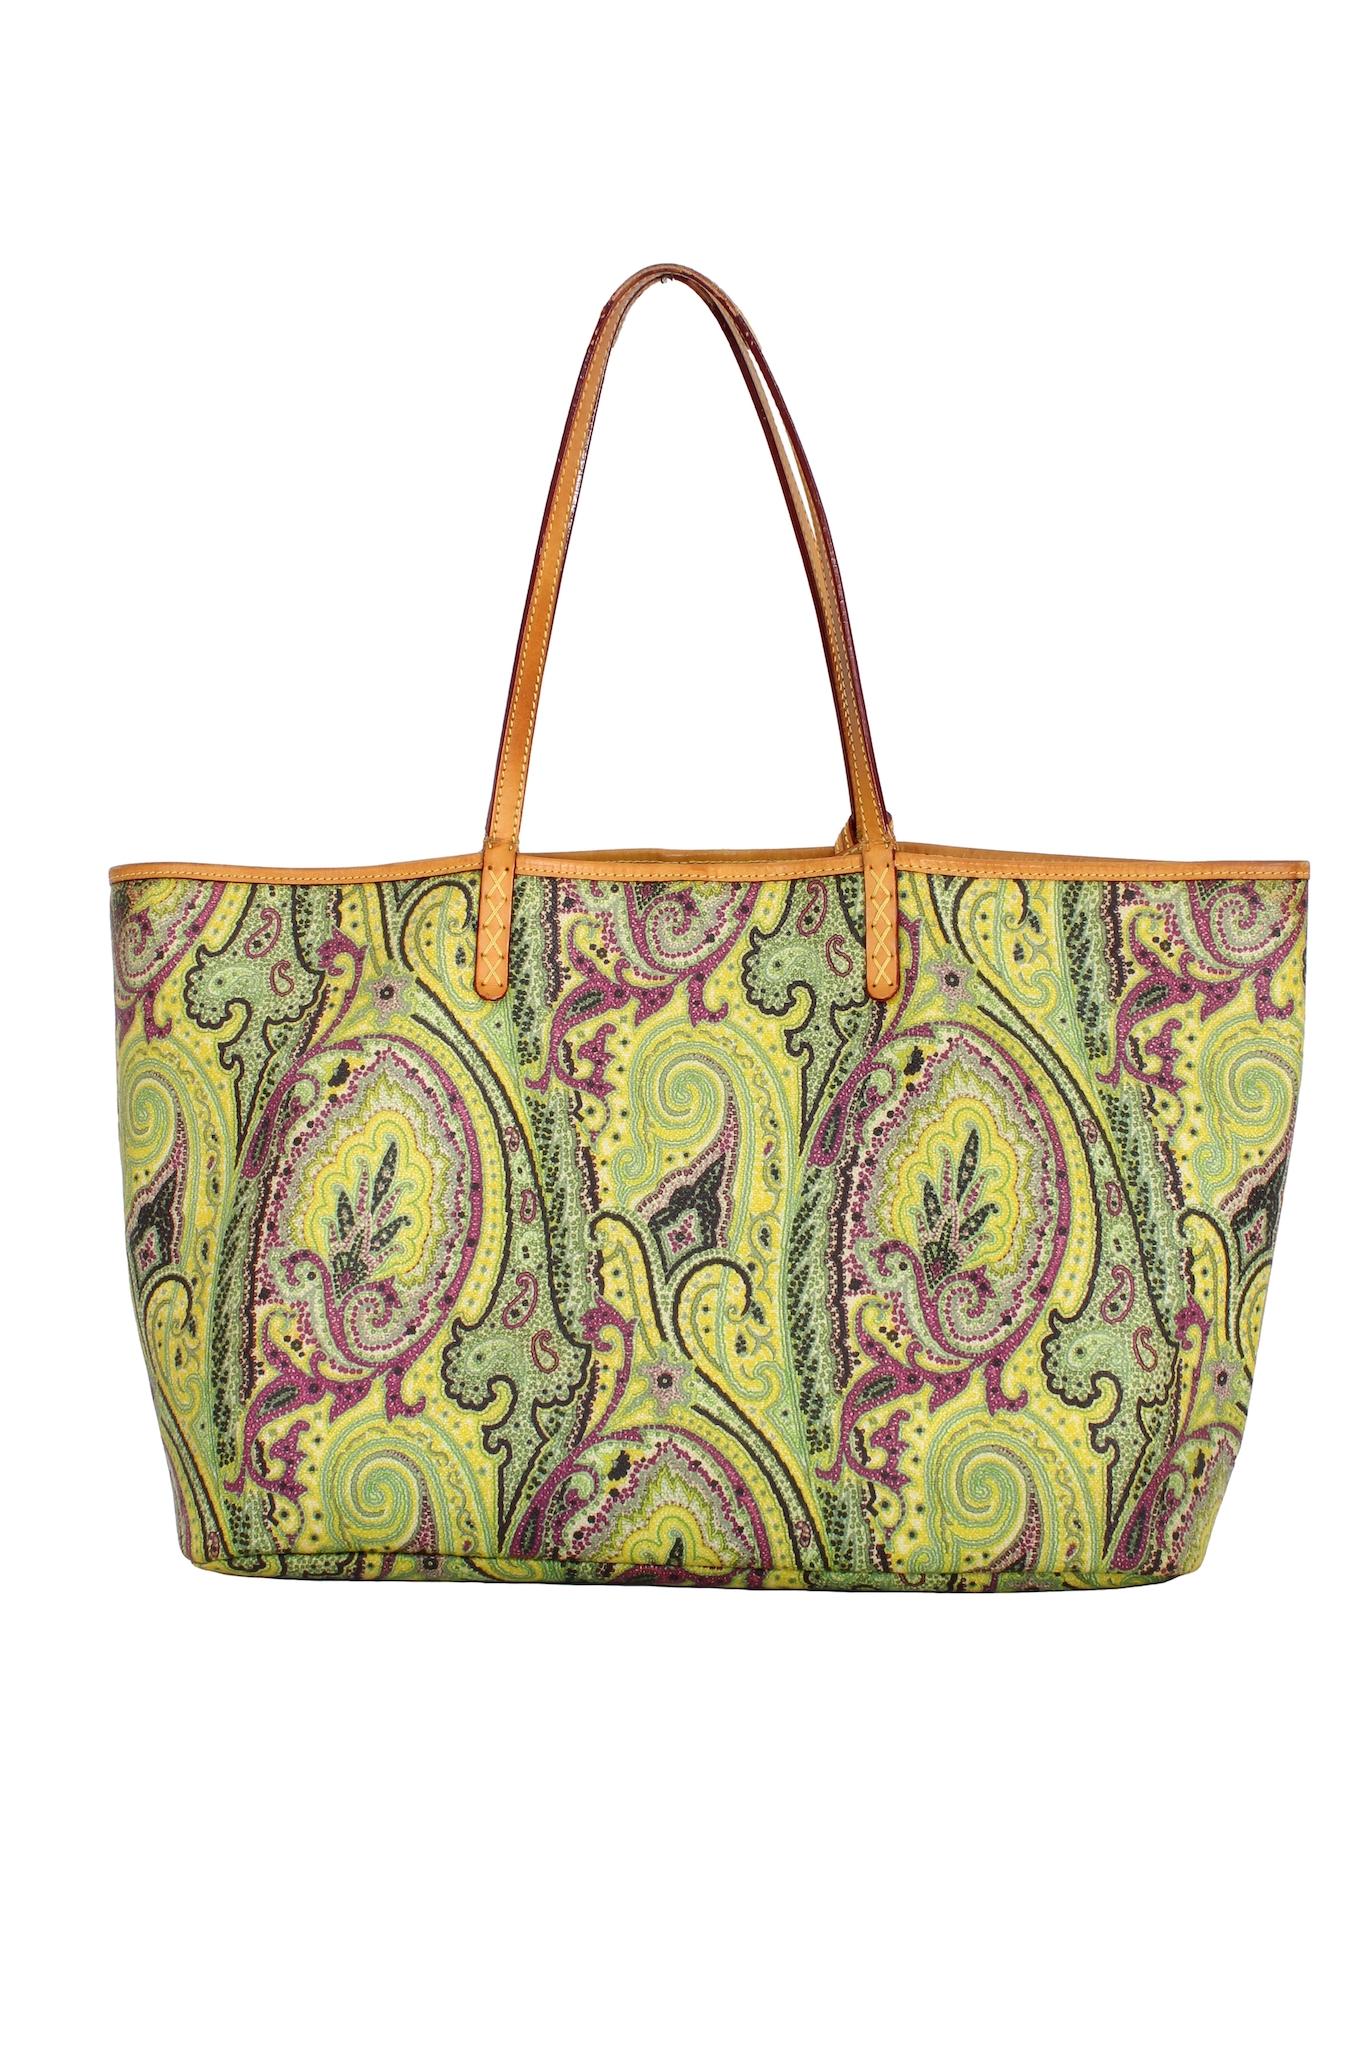 Etro green shoulder bag from the 2010s. Tote bag with small clutch bag included. Green paisley pattern with beige details. The general condition of the bag is very good, signs of wear on the handle joints.

Bag code: 1B375 4966 29/10/2010

Height: